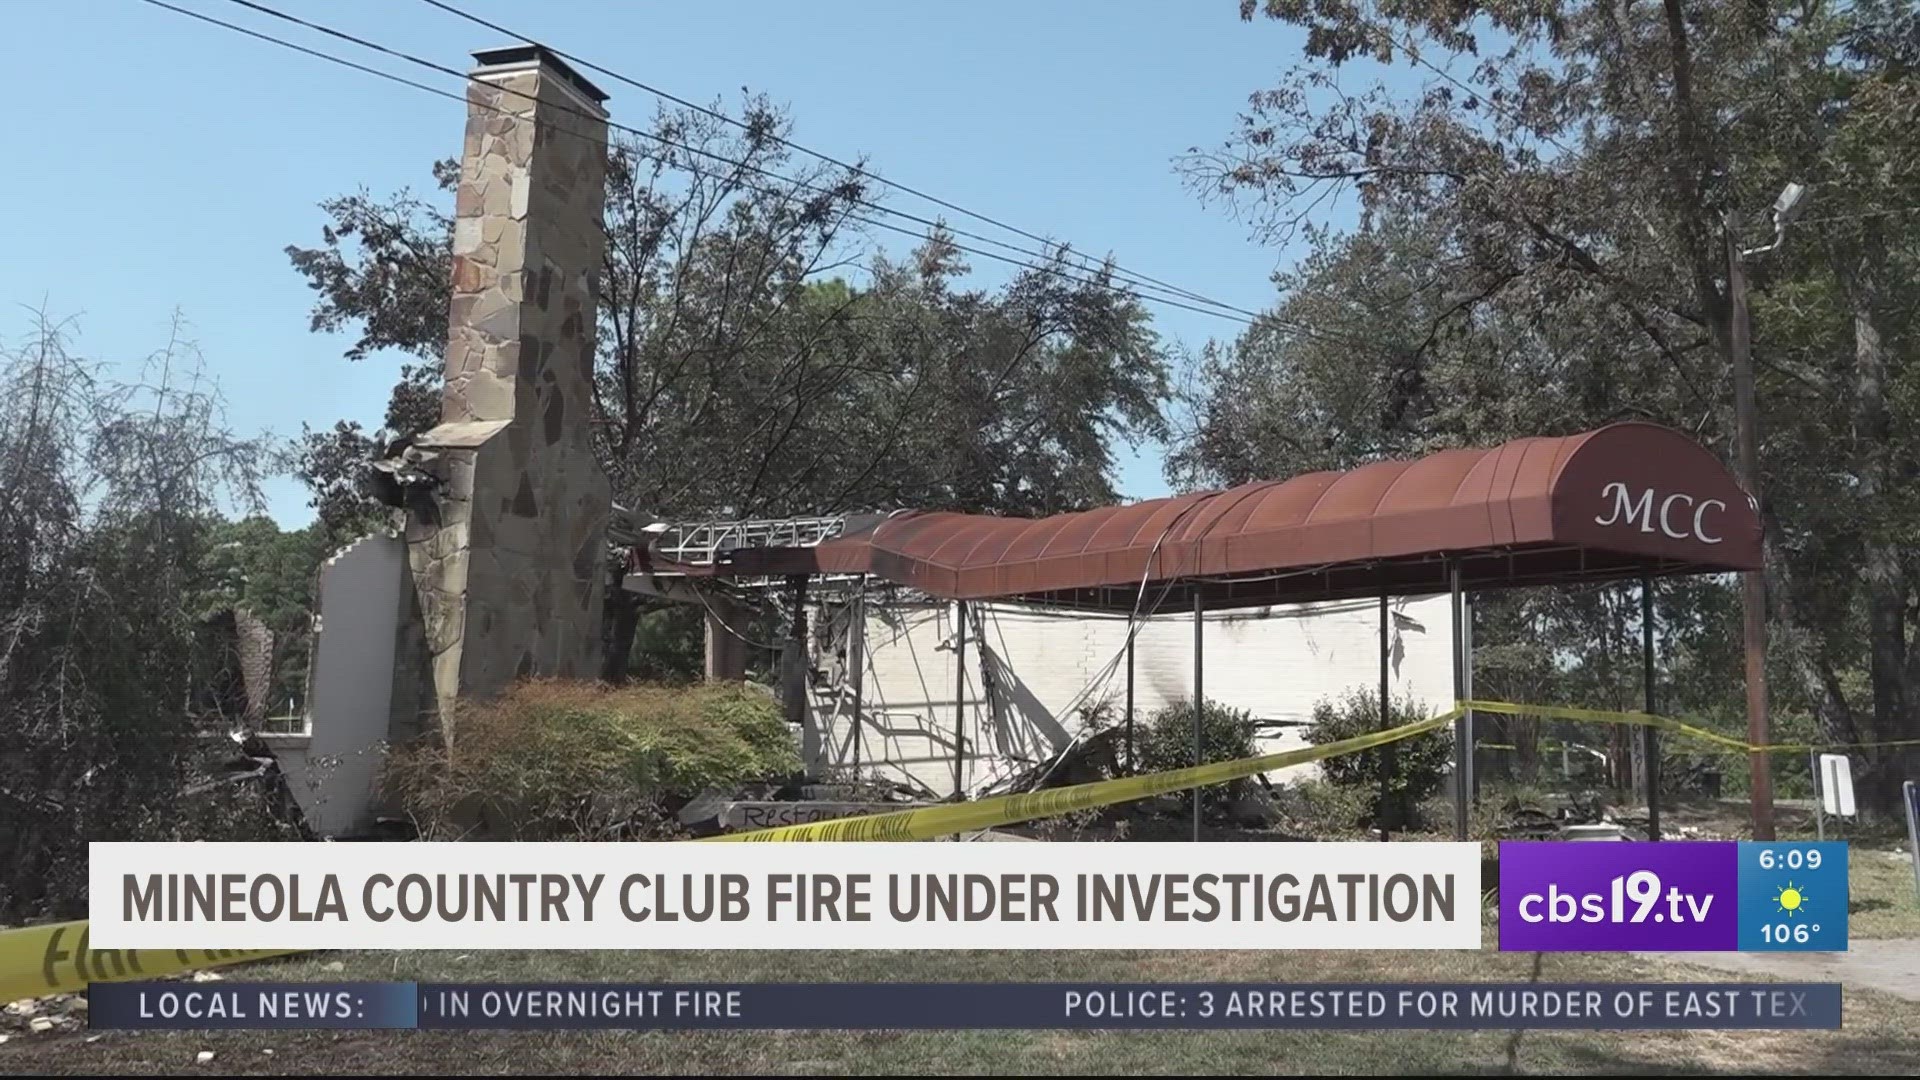 For nearly 100 years, Mineola Country Club stood tall as a fixture of Wood County. But it only took one night for that all to come burning down.